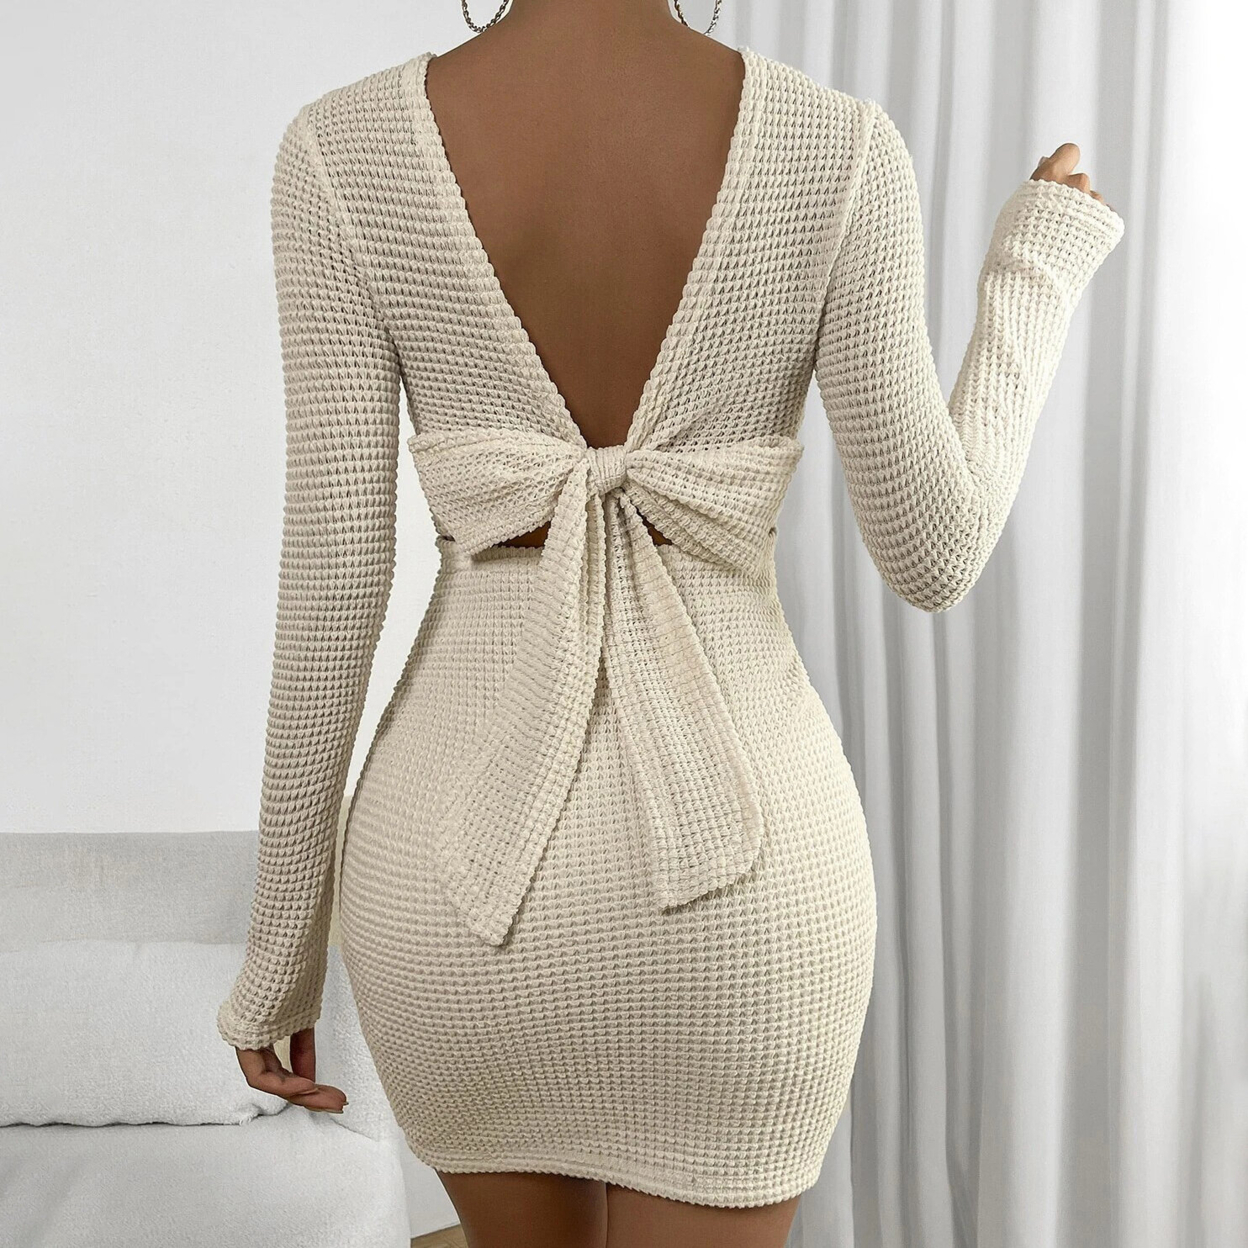 Tied Backless Bodycon Dress - Small(4)